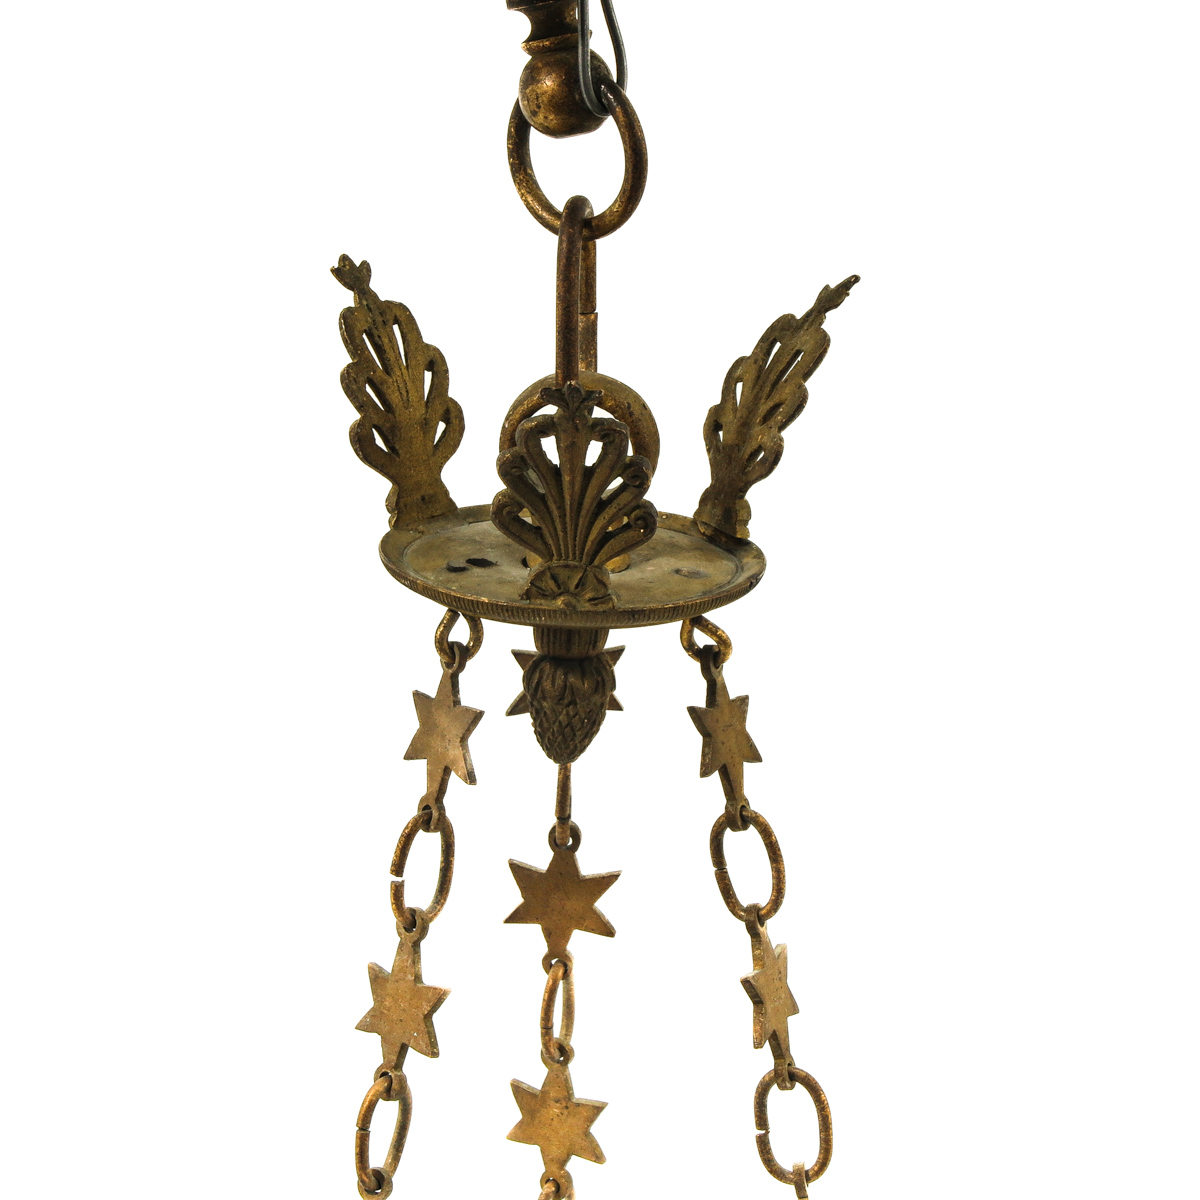 A 19th Century Bronze Chandelier - Image 4 of 6